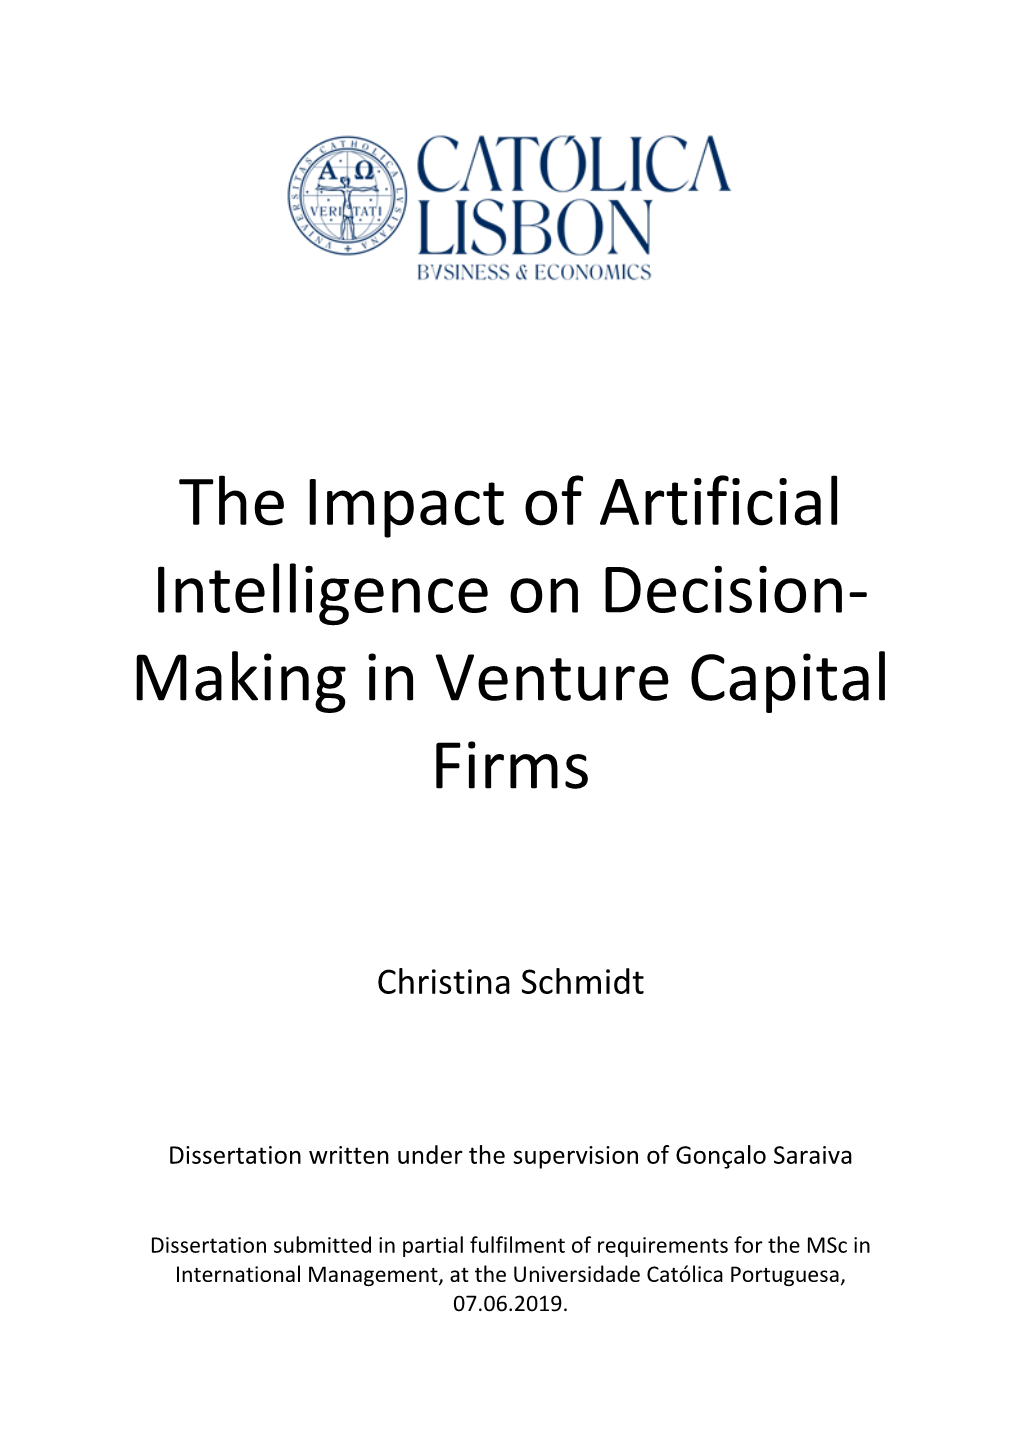 The Impact of Artificial Intelligence on Decision- Making in Venture Capital Firms